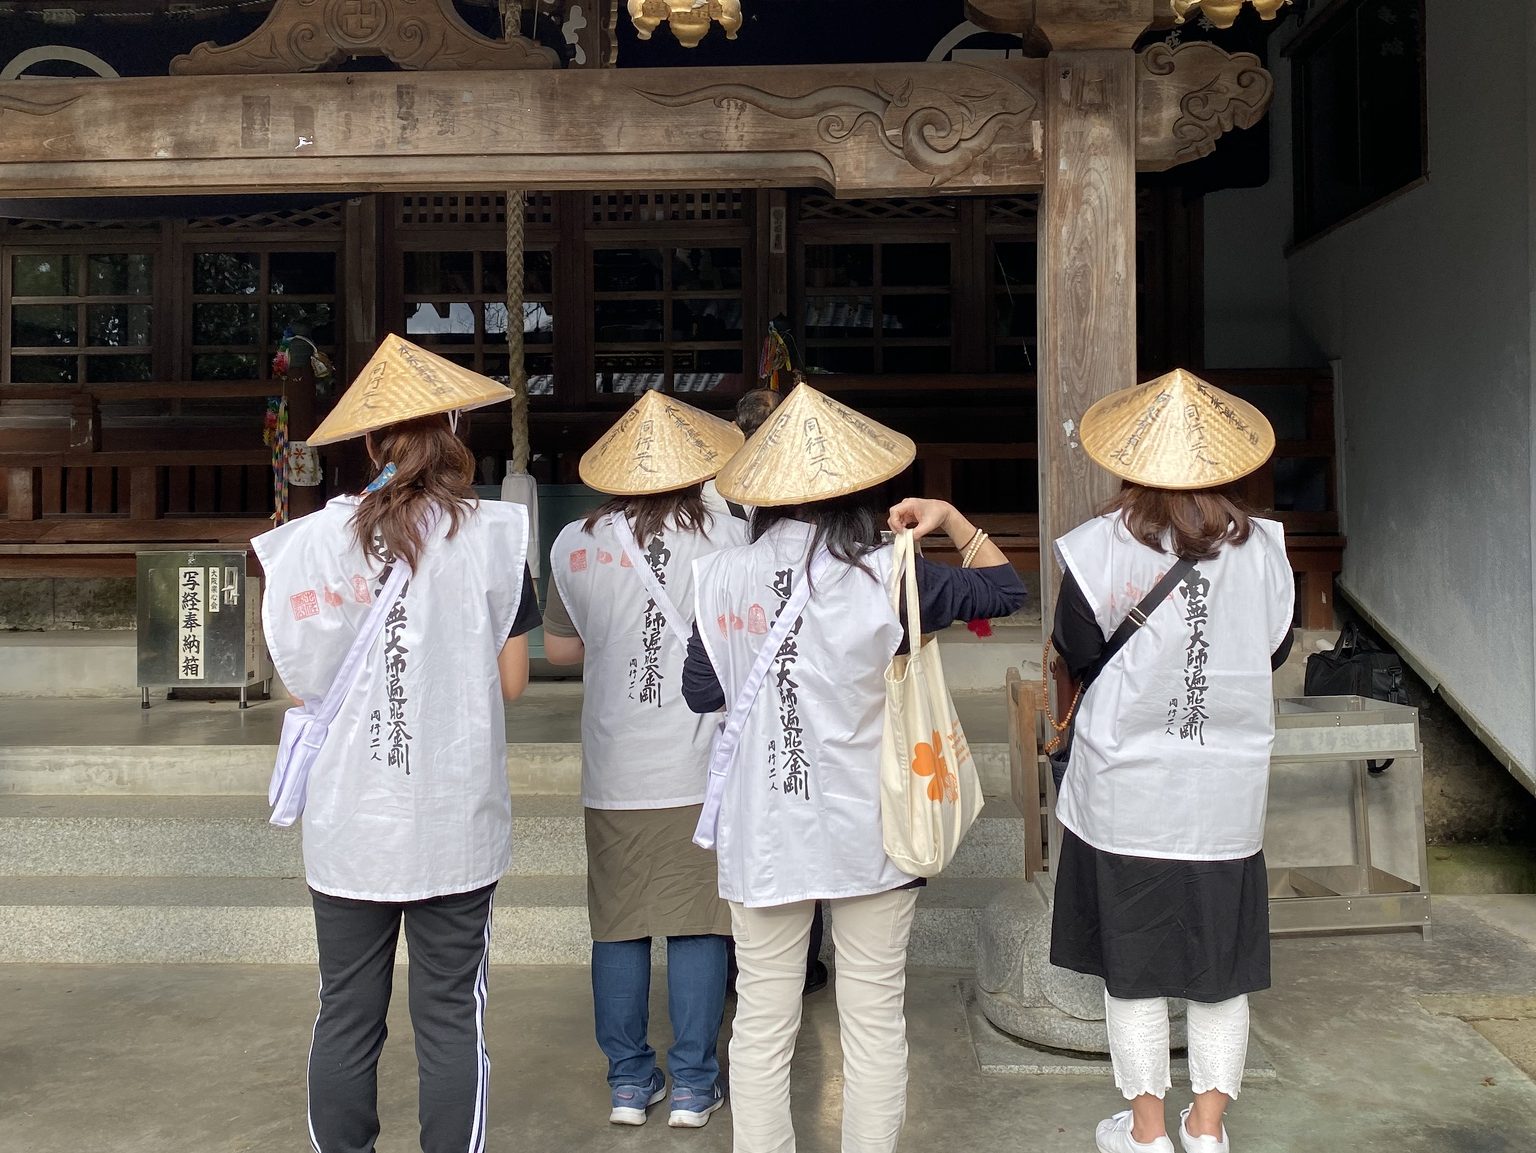 Group of Pilgrim Girls at the Temple